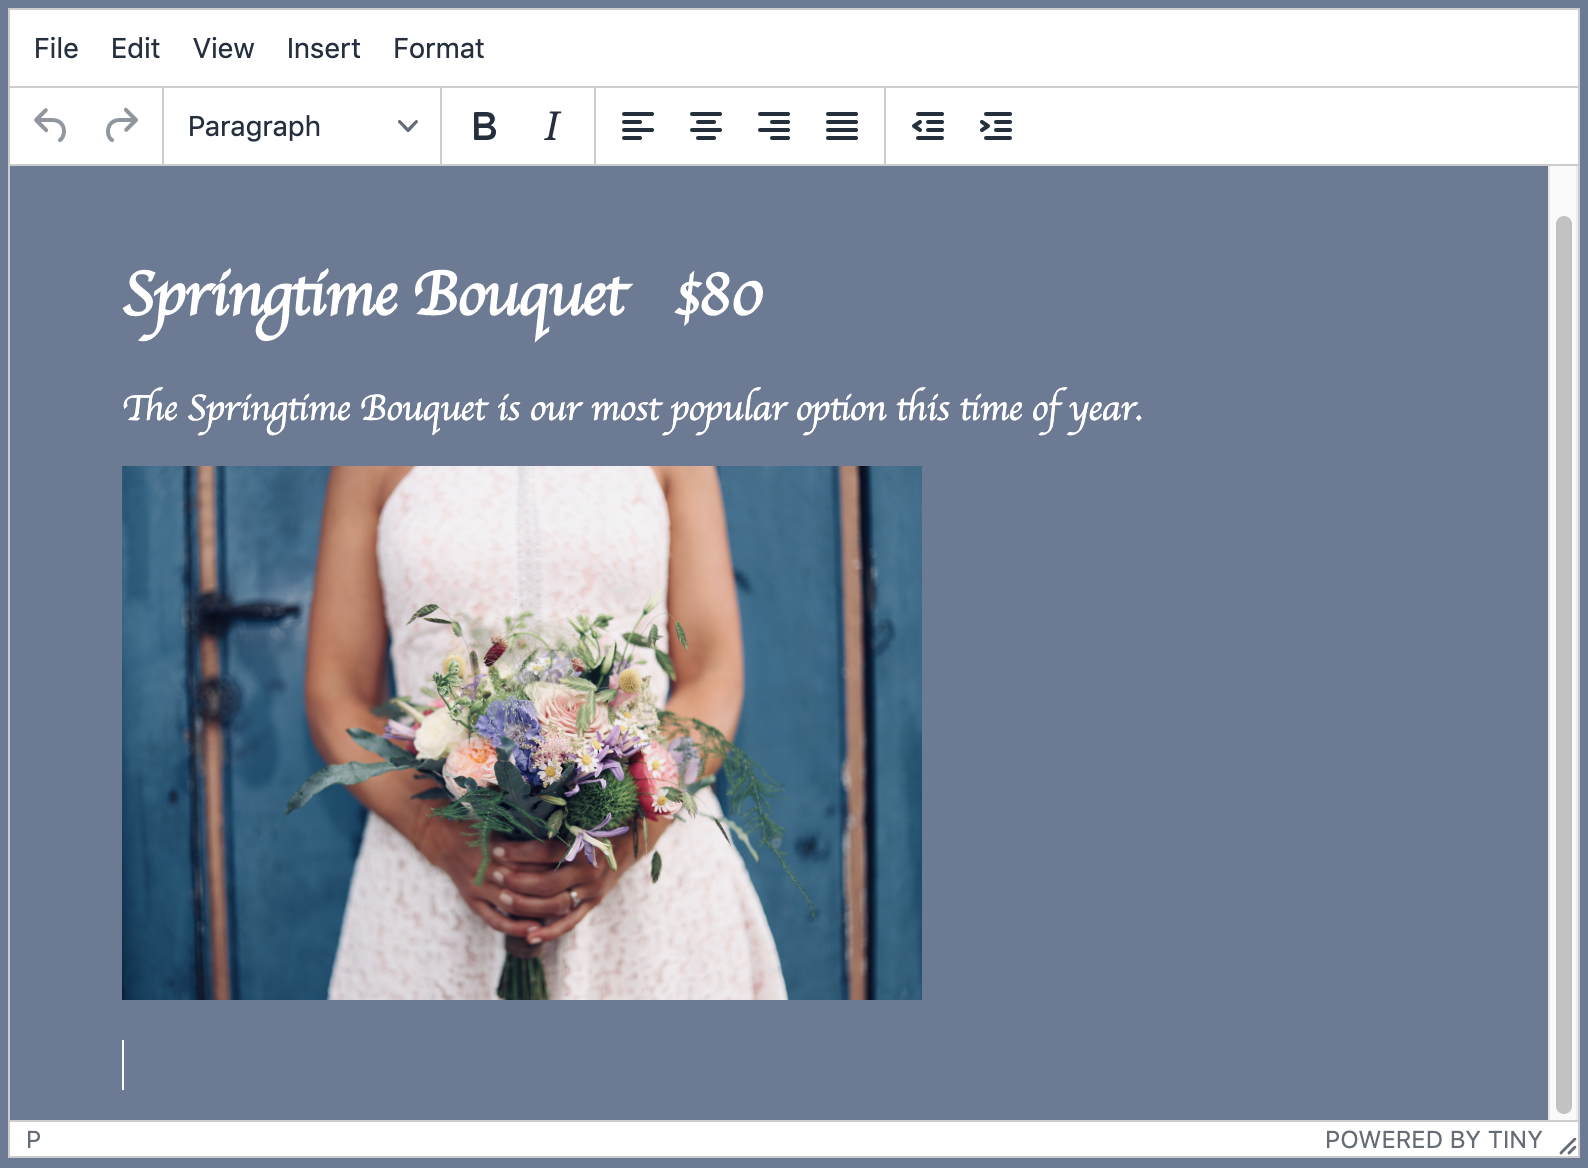 Screenshot of TinyMCE editor with an image of a wedding bouquet and cursive text reading 